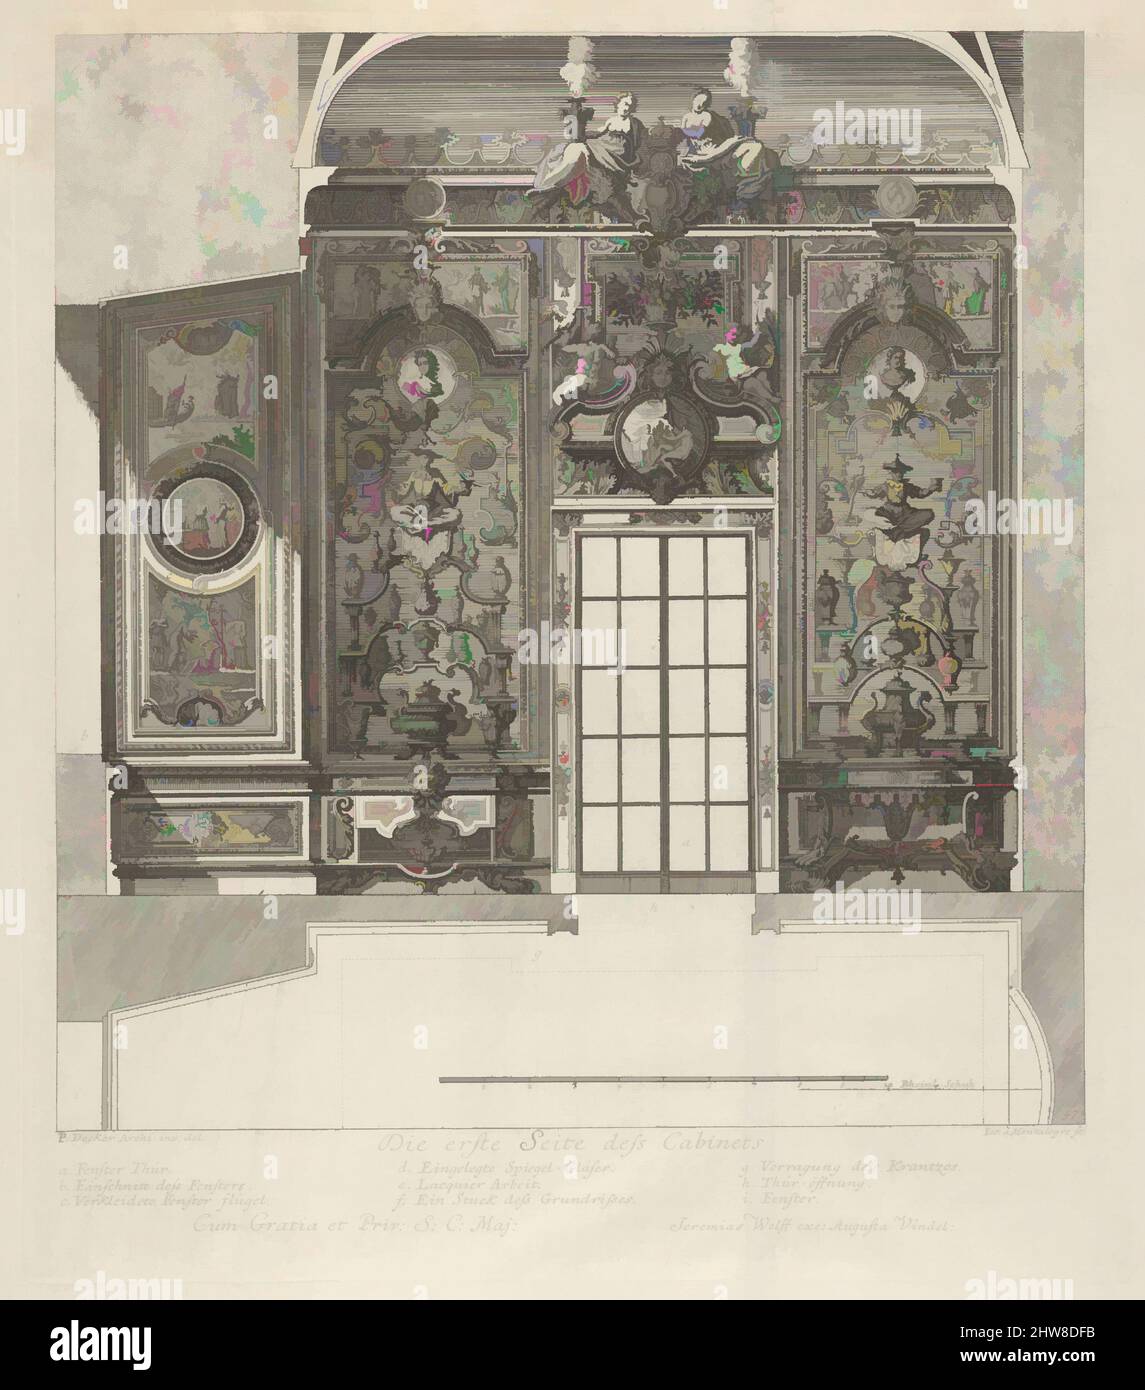 Art inspired by The First Wall of the Porcelain Room, from: 'Fürstlicher Baumeister Oder: Architectura civilis', 1711, Engraving, Plate: 13 × 11 3/8 in. (33 × 28.9 cm), Paul Decker the Elder (German, 1677–1713), This print comes from a book, published in Augsburg in 1711 under the, Classic works modernized by Artotop with a splash of modernity. Shapes, color and value, eye-catching visual impact on art. Emotions through freedom of artworks in a contemporary way. A timeless message pursuing a wildly creative new direction. Artists turning to the digital medium and creating the Artotop NFT Stock Photo